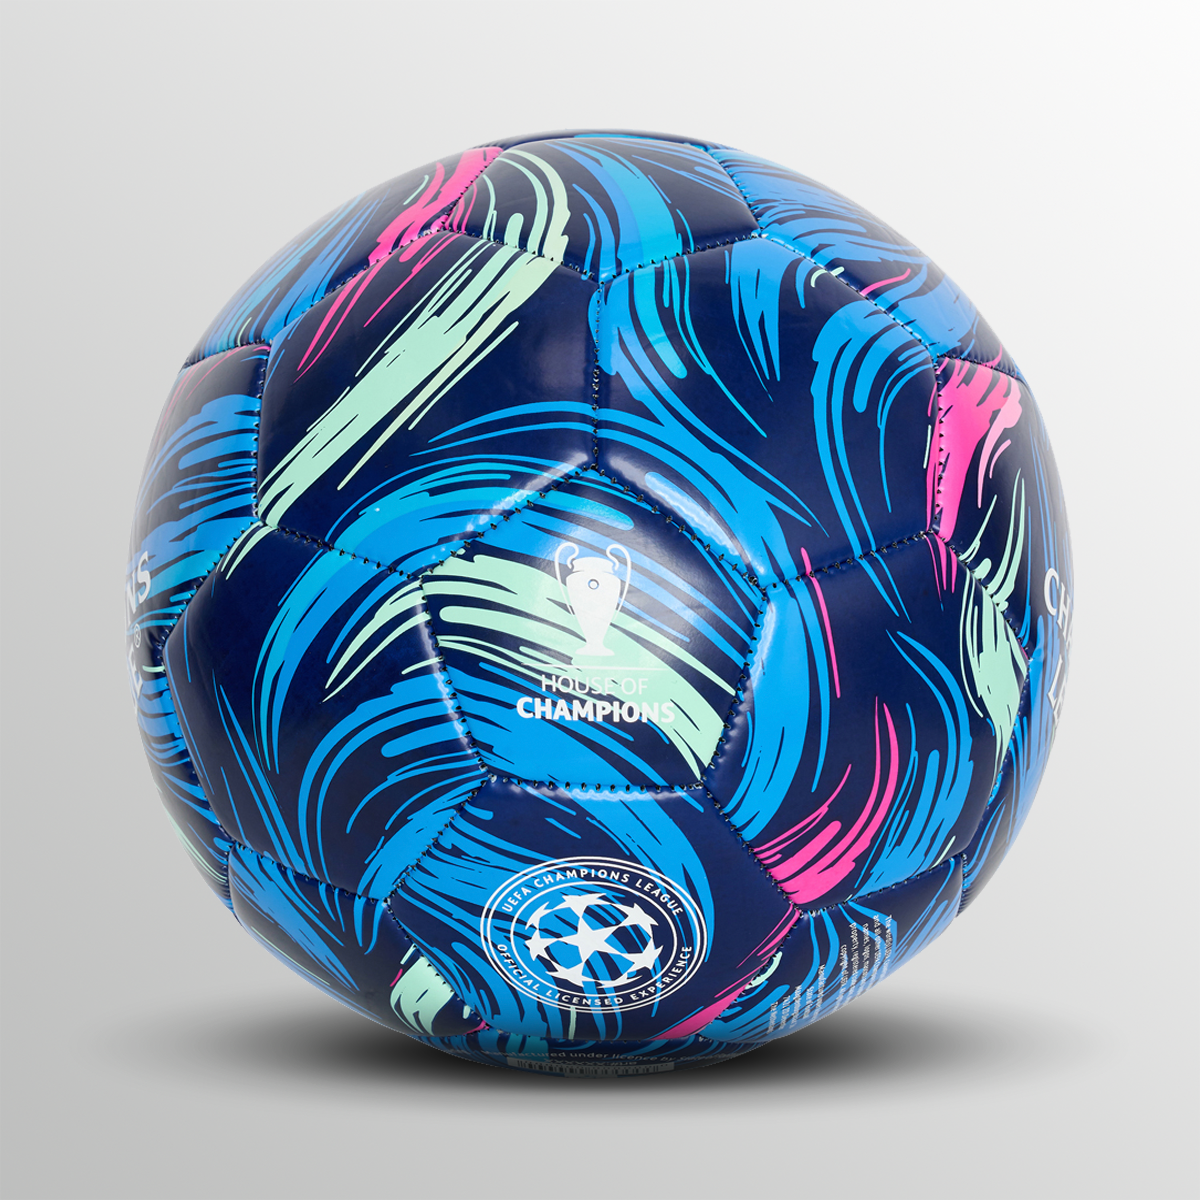 UEFA Champions League Brush Football UEFA Club Competitions Online Store